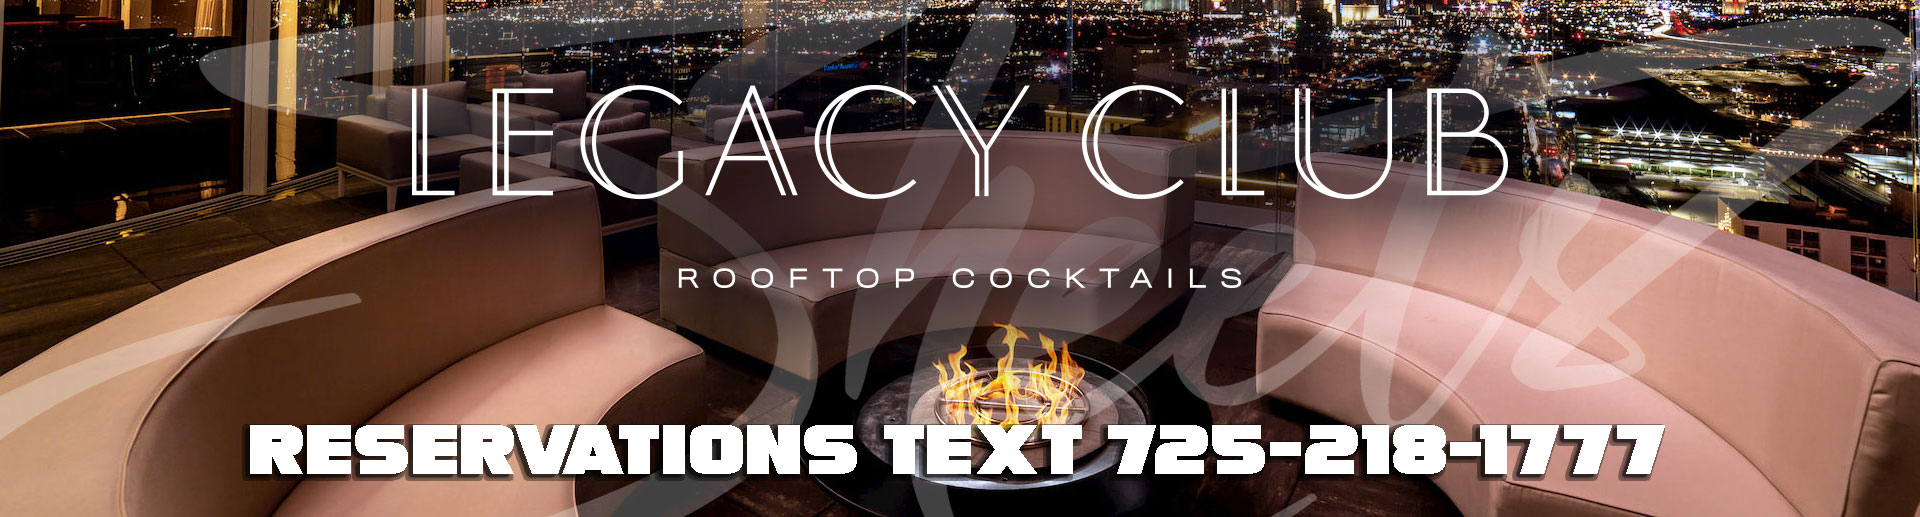 Legacy Club™ Rooftop Cocktails